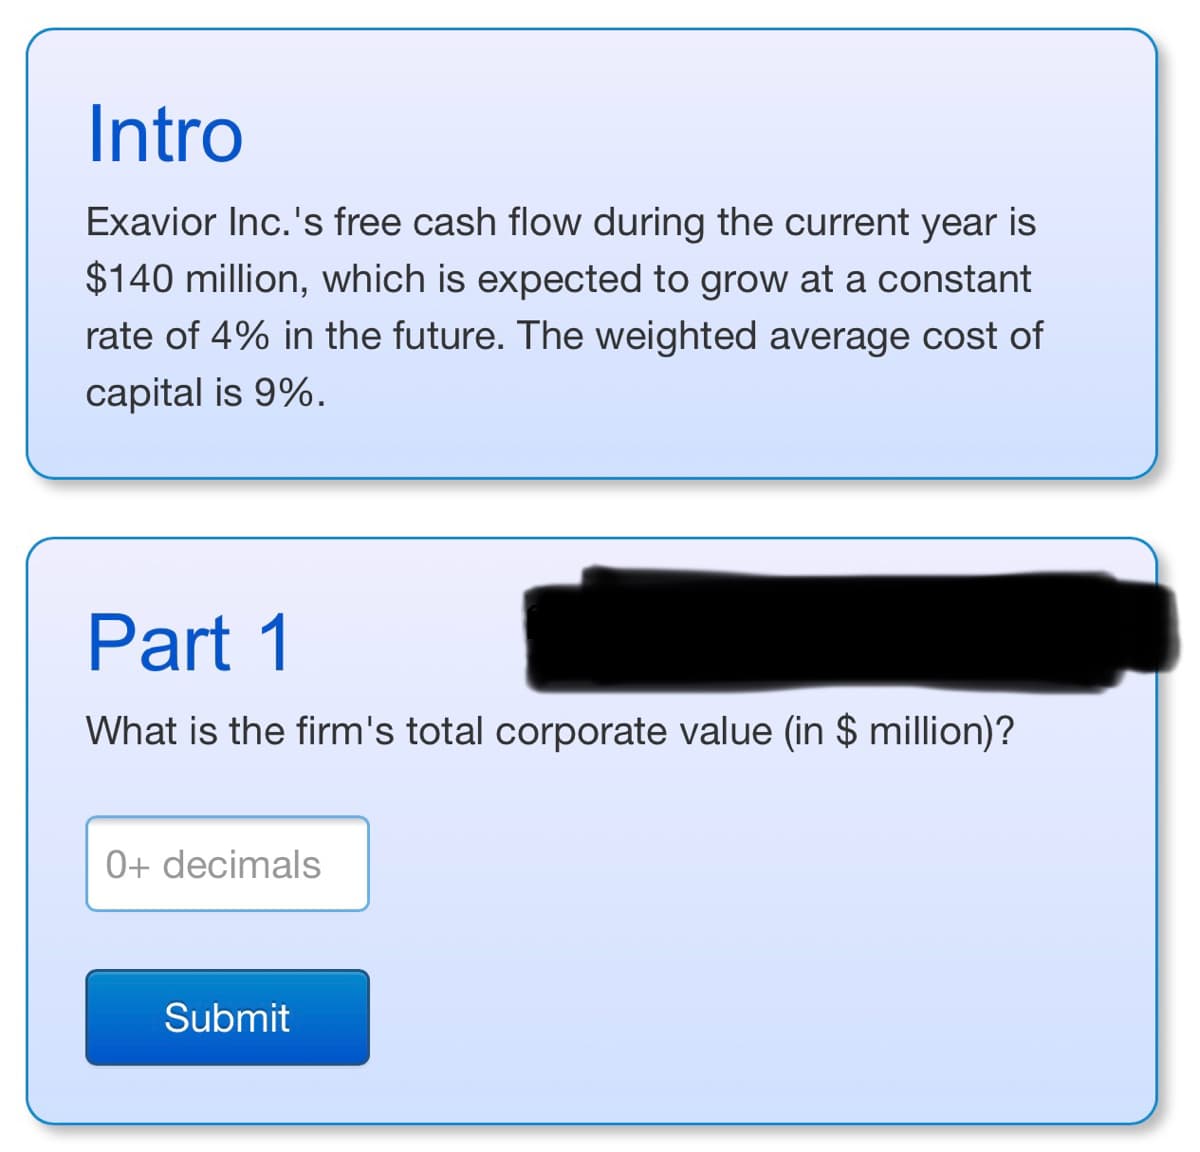 Intro
Exavior Inc.'s free cash flow during the current year is
$140 million, which is expected to grow at a constant
rate of 4% in the future. The weighted average cost of
capital is 9%.
Part 1
What is the firm's total corporate value (in $ million)?
0+ decimals
Submit